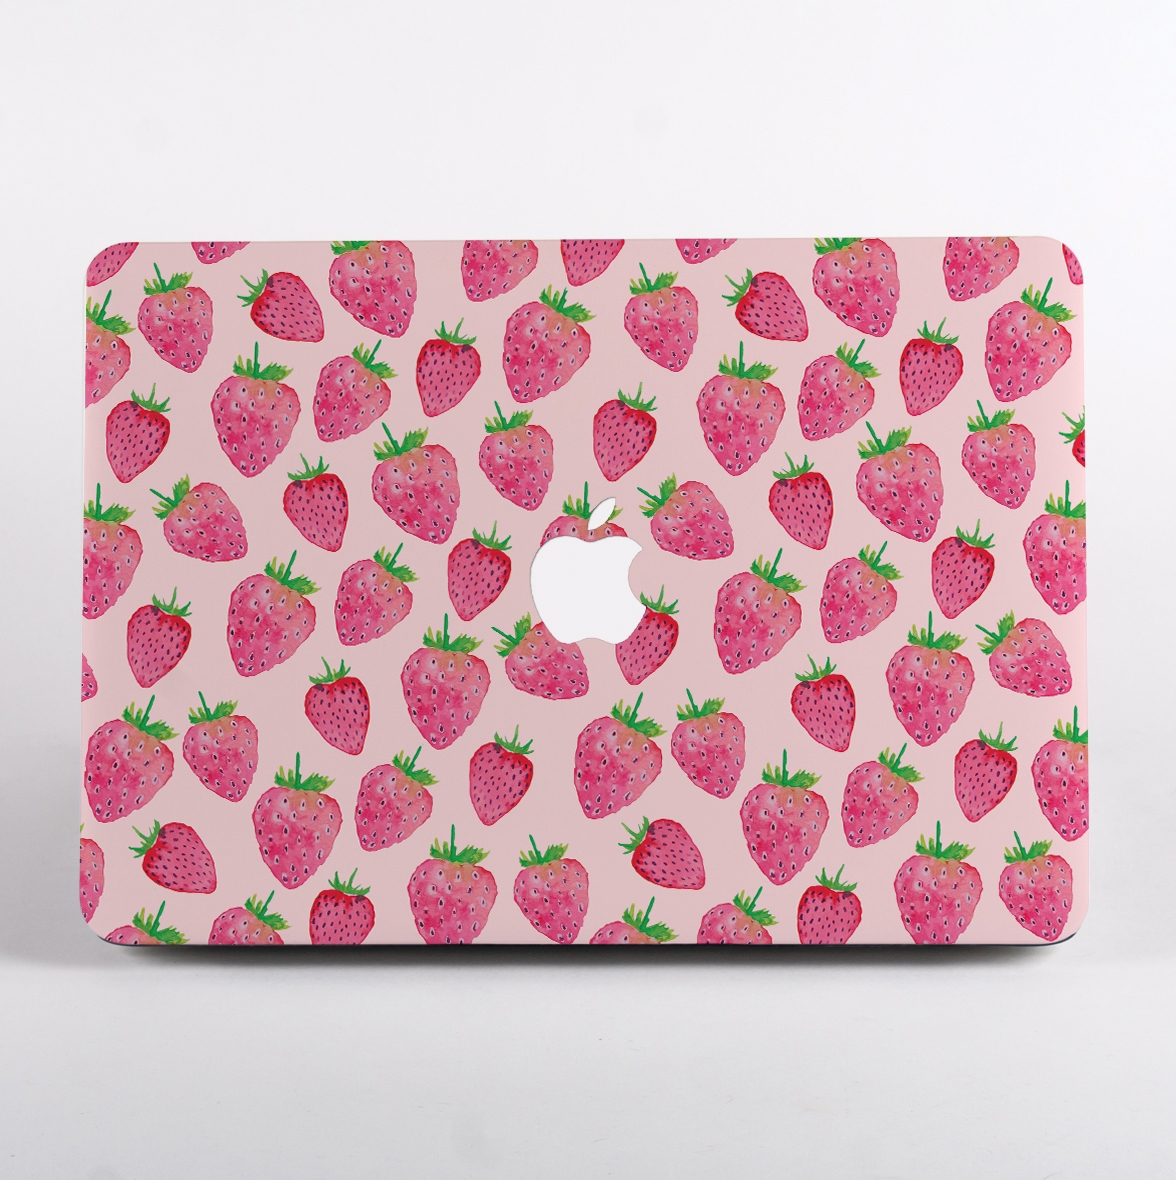 Mac Book Air Covers Sweets Delicious Cute Cake Donuts Plastic Hard Shell Compatible Mac Air 11 Pro 13 15 12inch MacBook Case Protection for MacBook 2016-2019 Version 